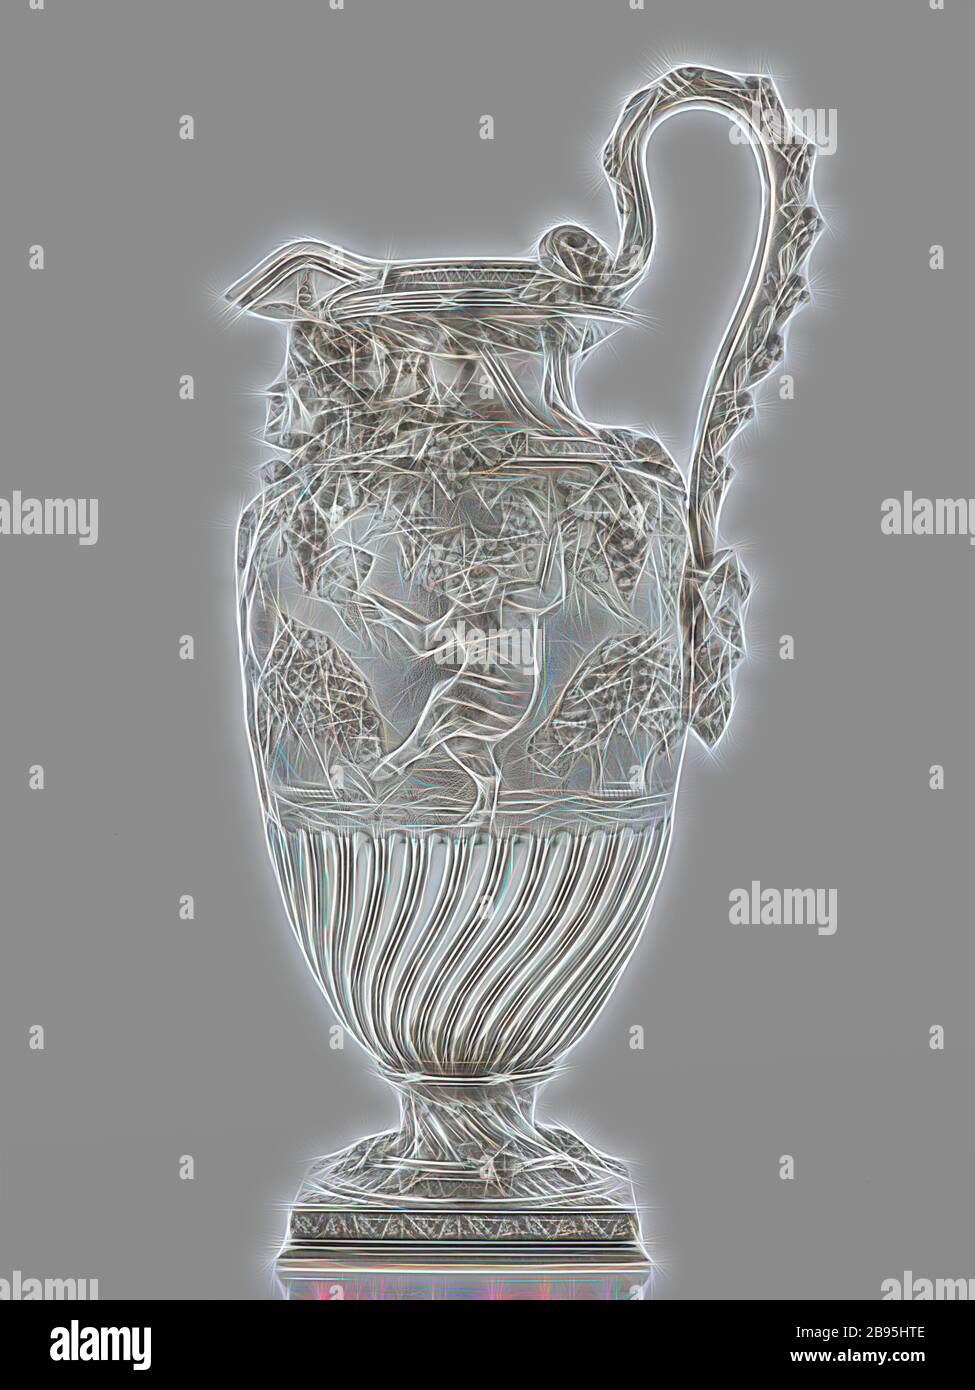 wine ewer, Tiffany & Co., Manufacturer (American), about 1890, silver, 18-1/2 x 7-1/4 x 9-3/4 in., Inscribed, at underside: Thomas Horncastle Esquire Presented by the Mutual Life Insurance Company of New York Jan 1 1890 Inscribed, at underside in center: Tiffany & Co. 5659 Makers 7117/ STERLING SILVER/ 925-1000/ M, 5Q'TS Inscribed, scratched at underside: 116/85 589, 461698, Decorative Arts, Reimagined by Gibon, design of warm cheerful glowing of brightness and light rays radiance. Classic art reinvented with a modern twist. Photography inspired by futurism, embracing dynamic energy of modern Stock Photo